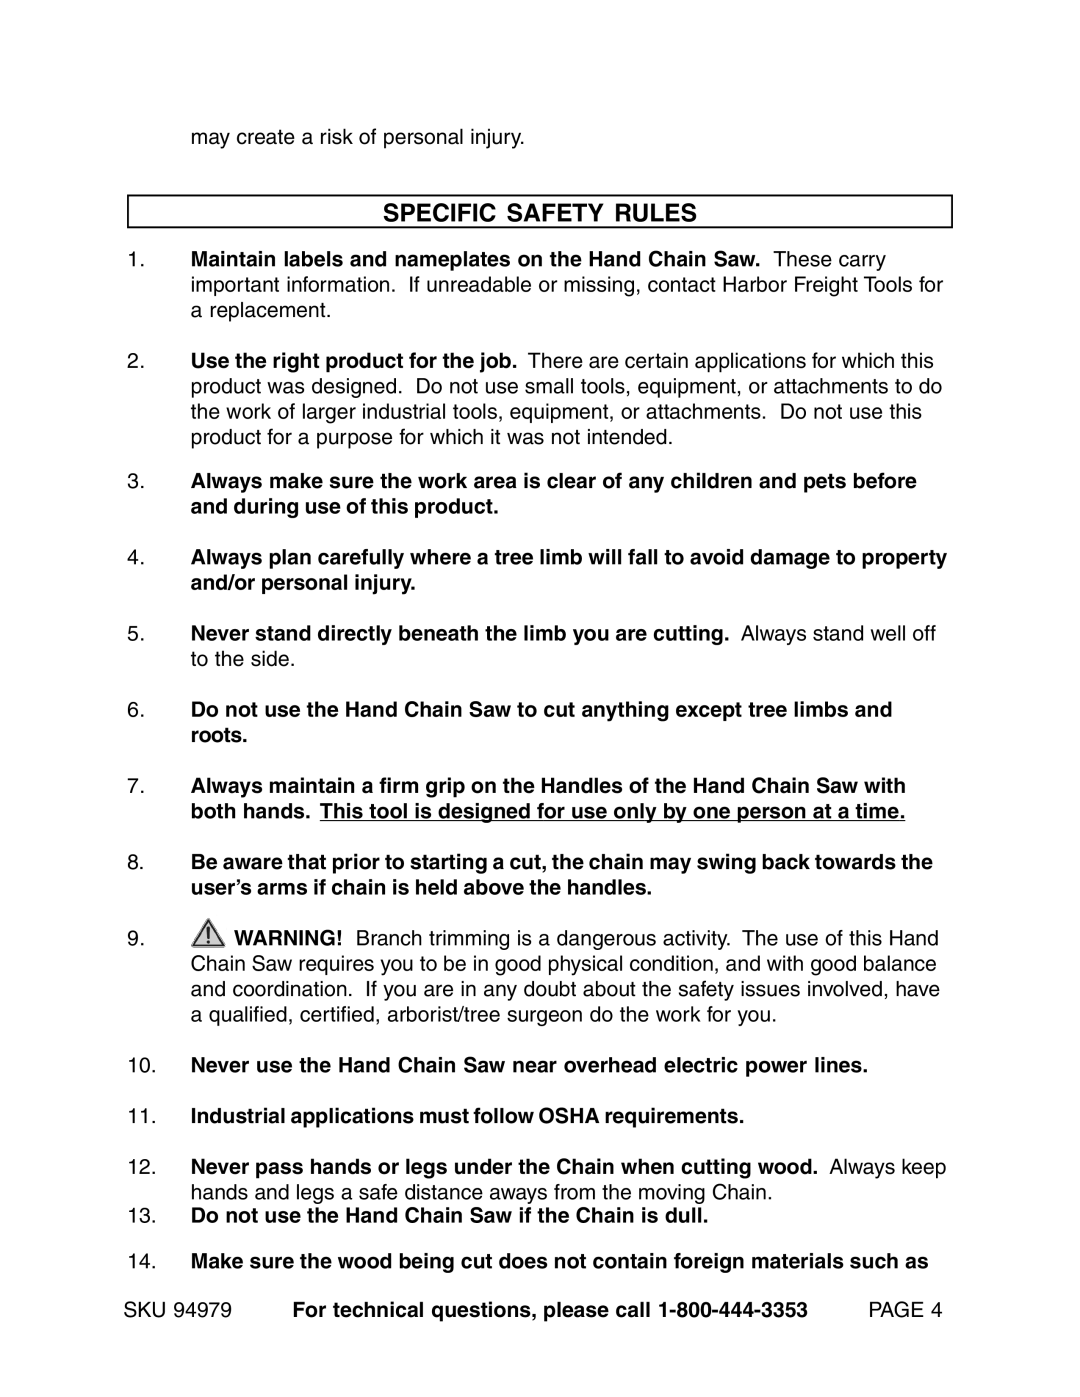 Harbor Freight Tools 94979 manual Specific Safety Rules, Never use the Hand Chain Saw near overhead electric power lines 